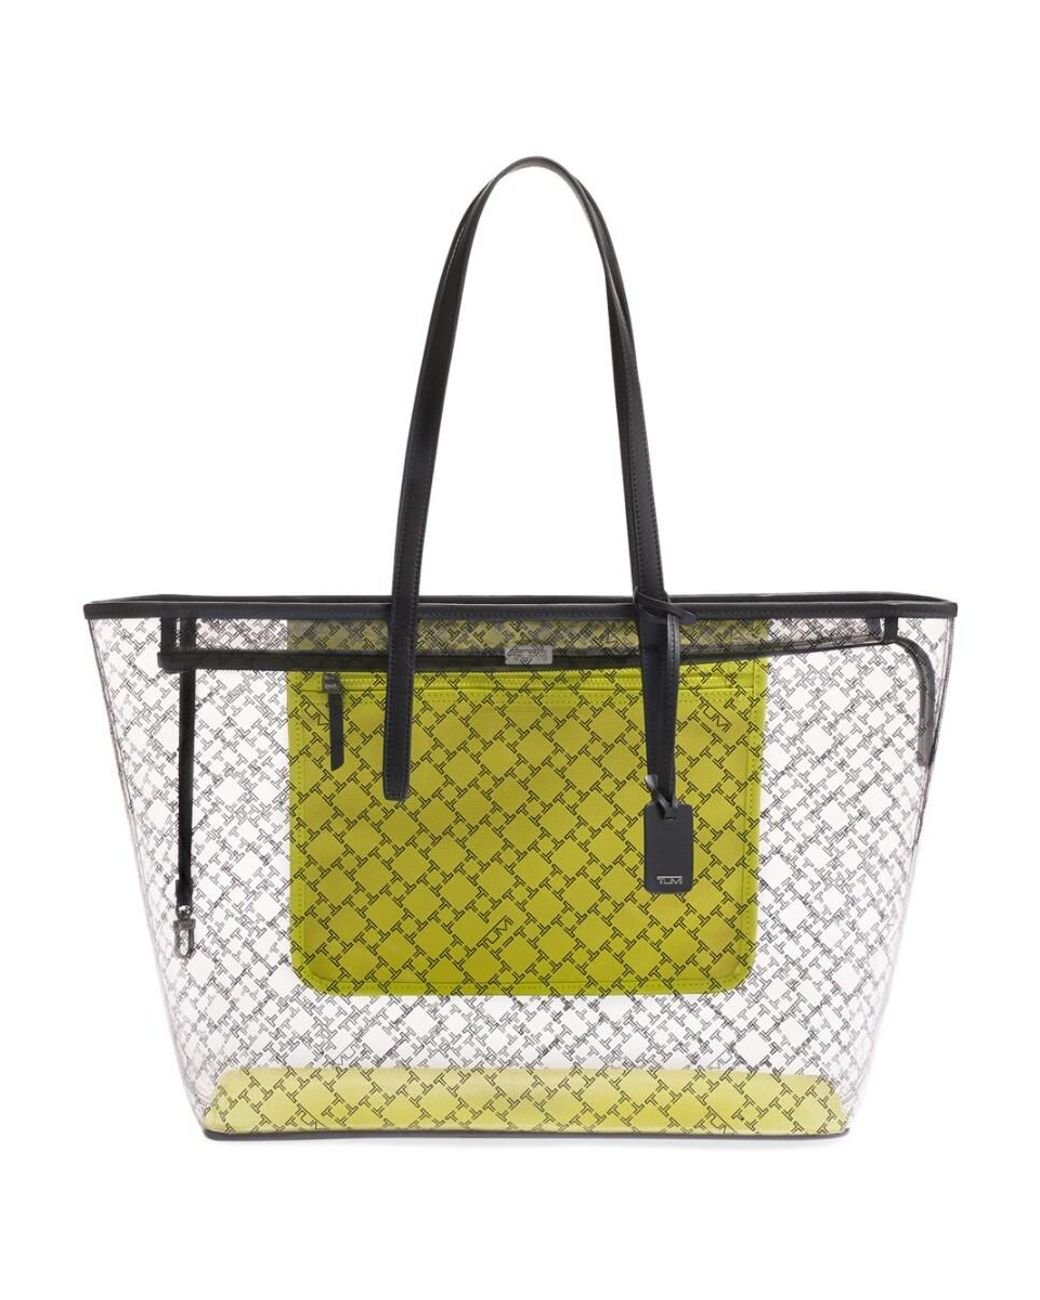 Tumi Everyday Tote - Translucent Bright Lime | Lyst